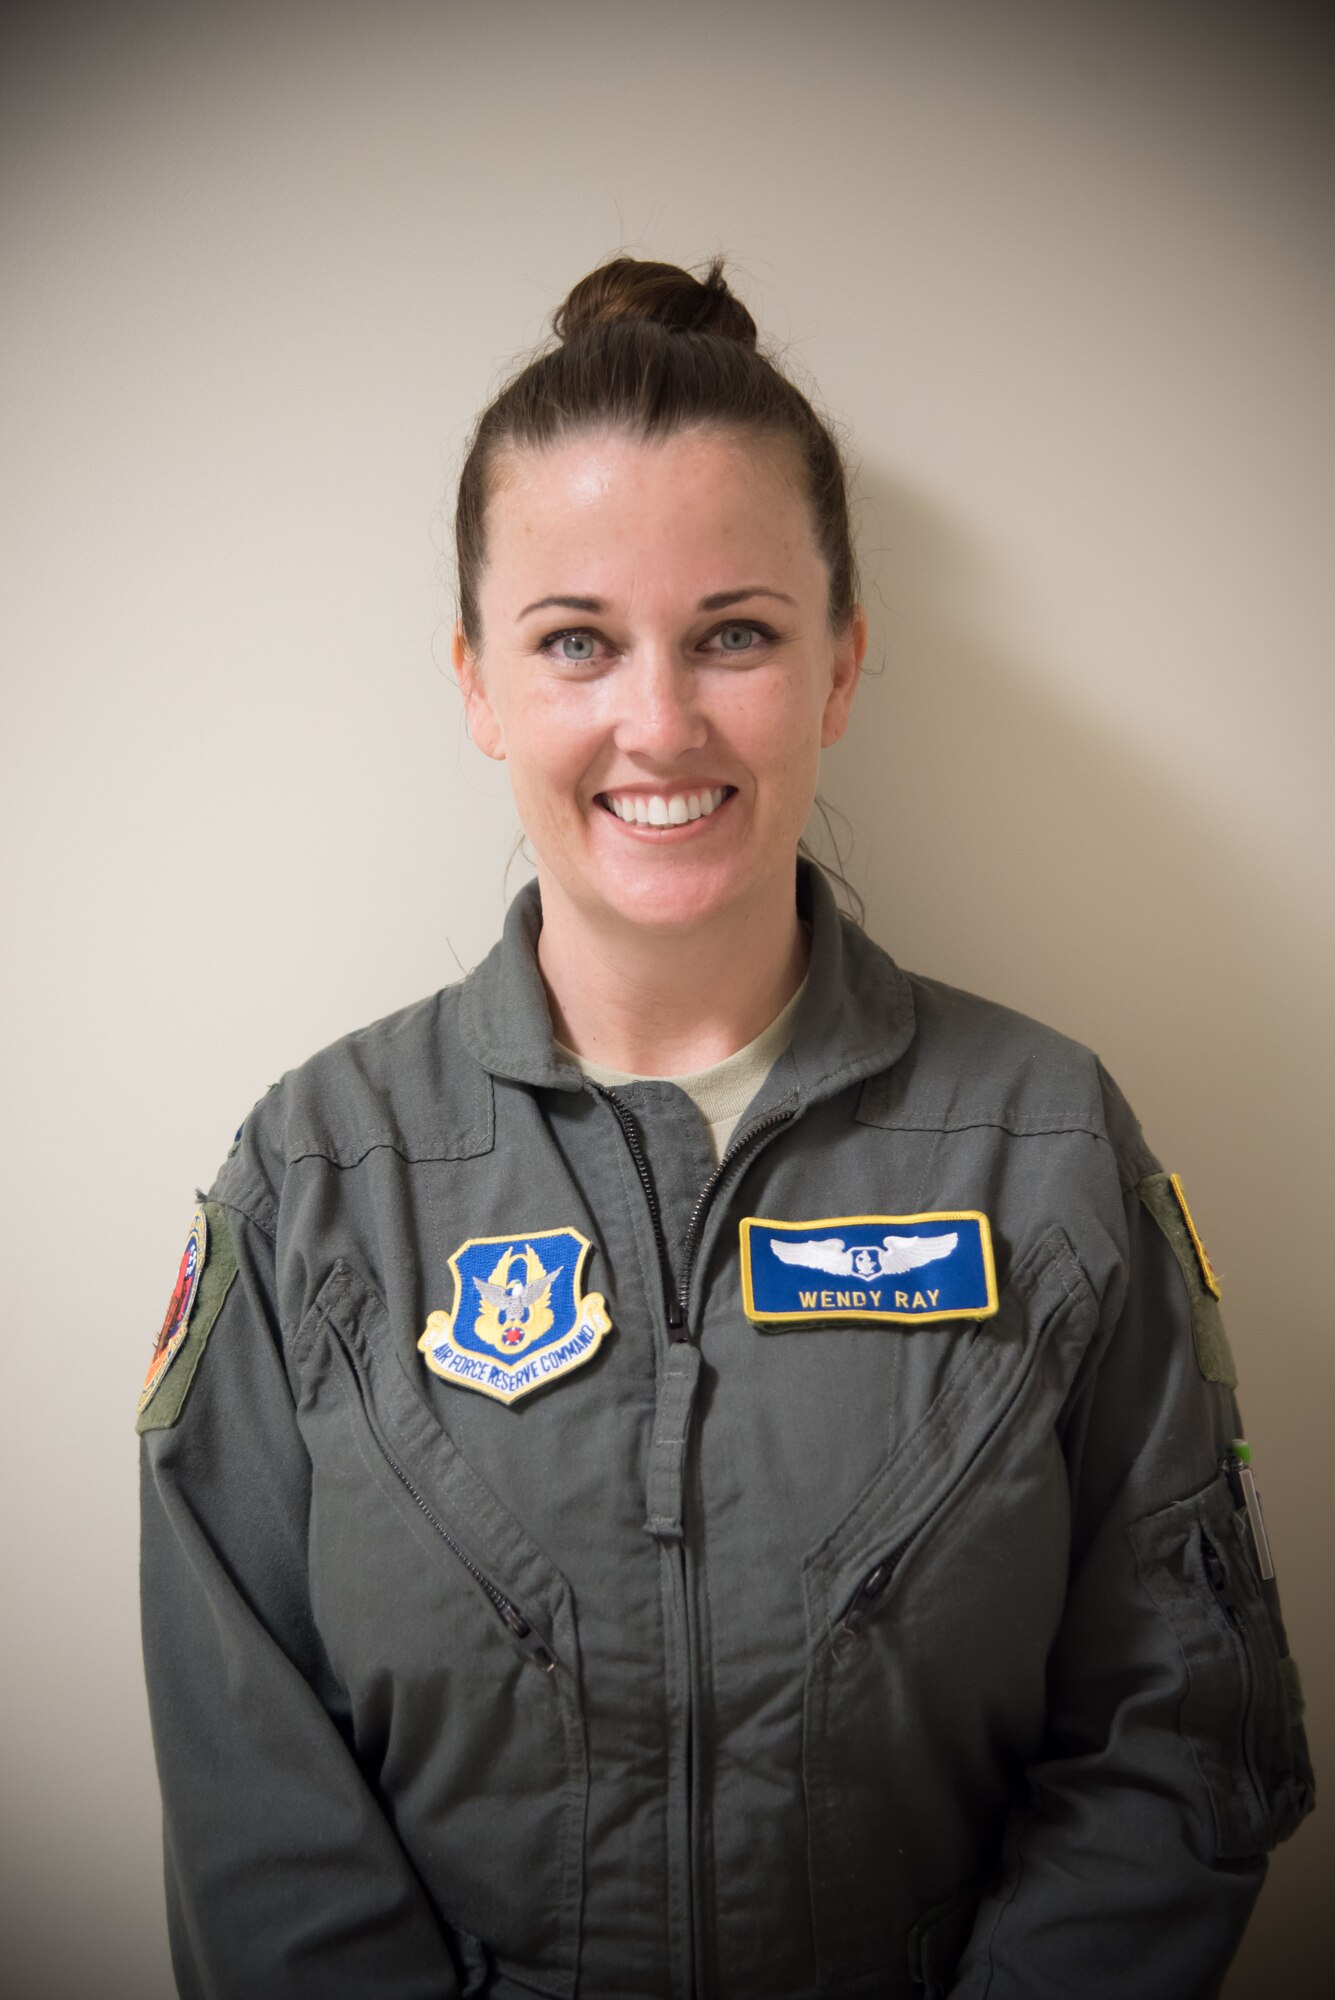 Capt. Wendy Ray, 36th Aeromedical Evacuation Squadron, poses for a photo after being named Company Grade Officer of the Quarter June 2, 2017 at Keesler Air Force Base, Mississippi. (U.S. Air Force photo/Maj. Marnee A.C. Losurdo)